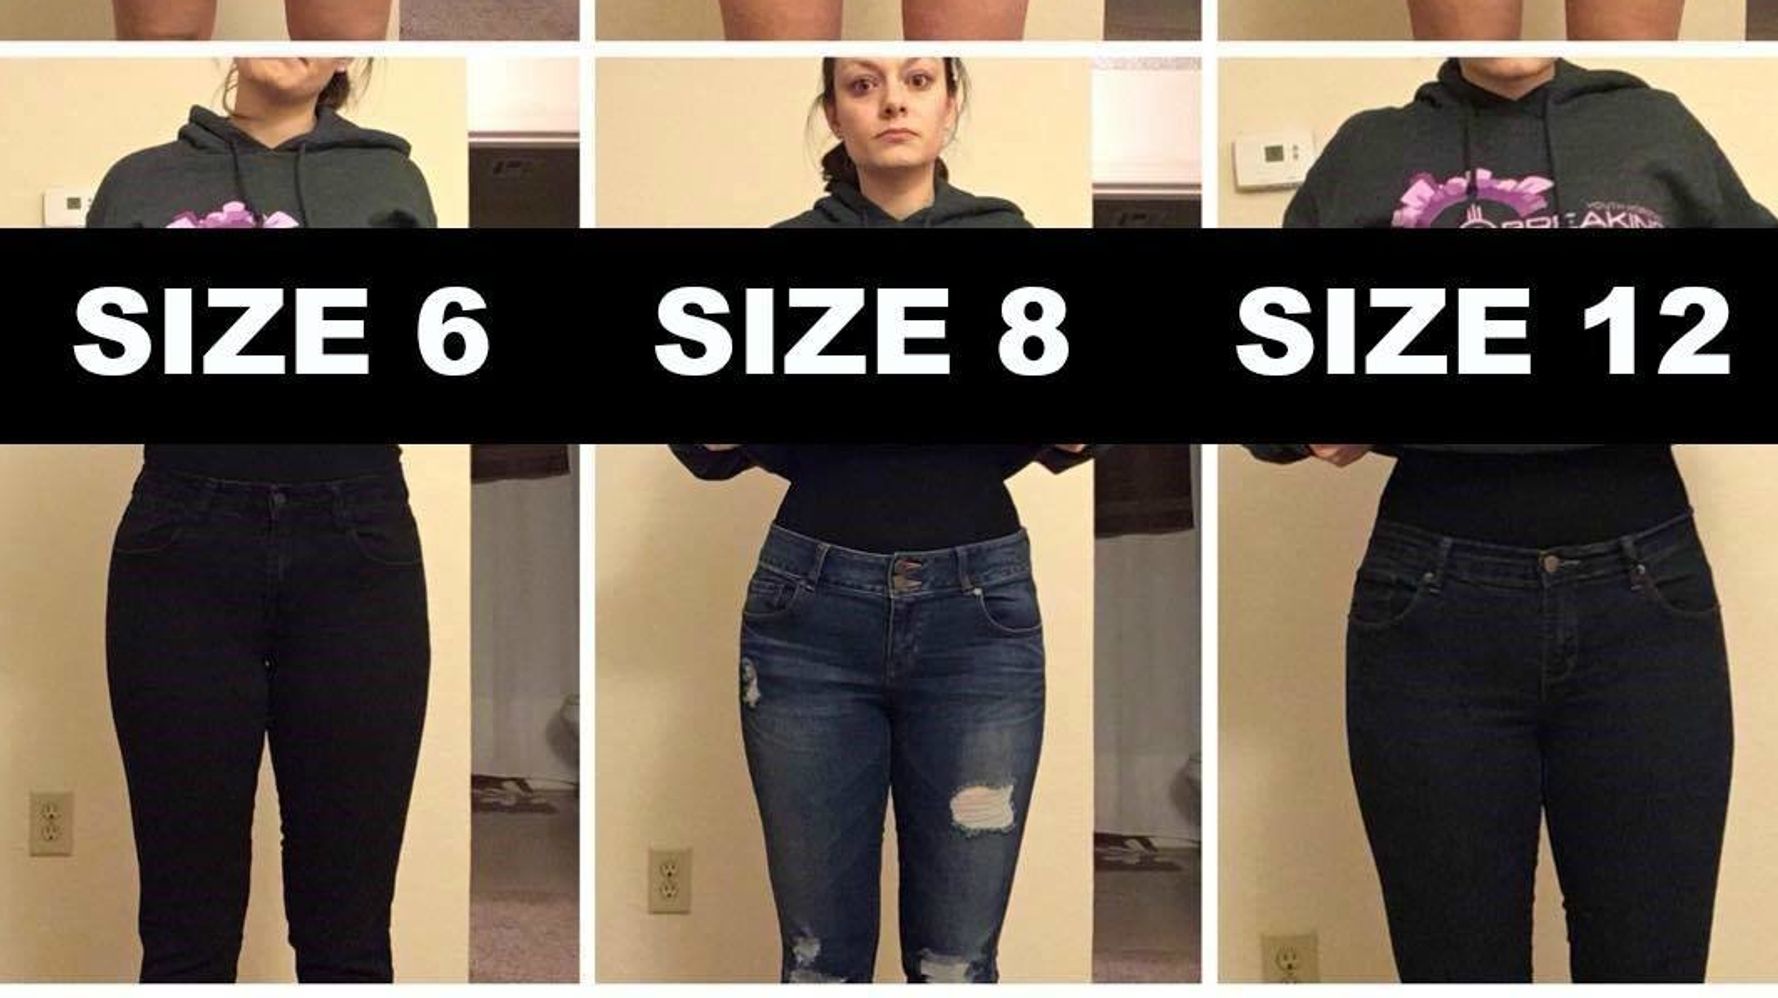 Woman Poses In Varying Pants Sizes To Make A Point About Body Image Huffpost Life